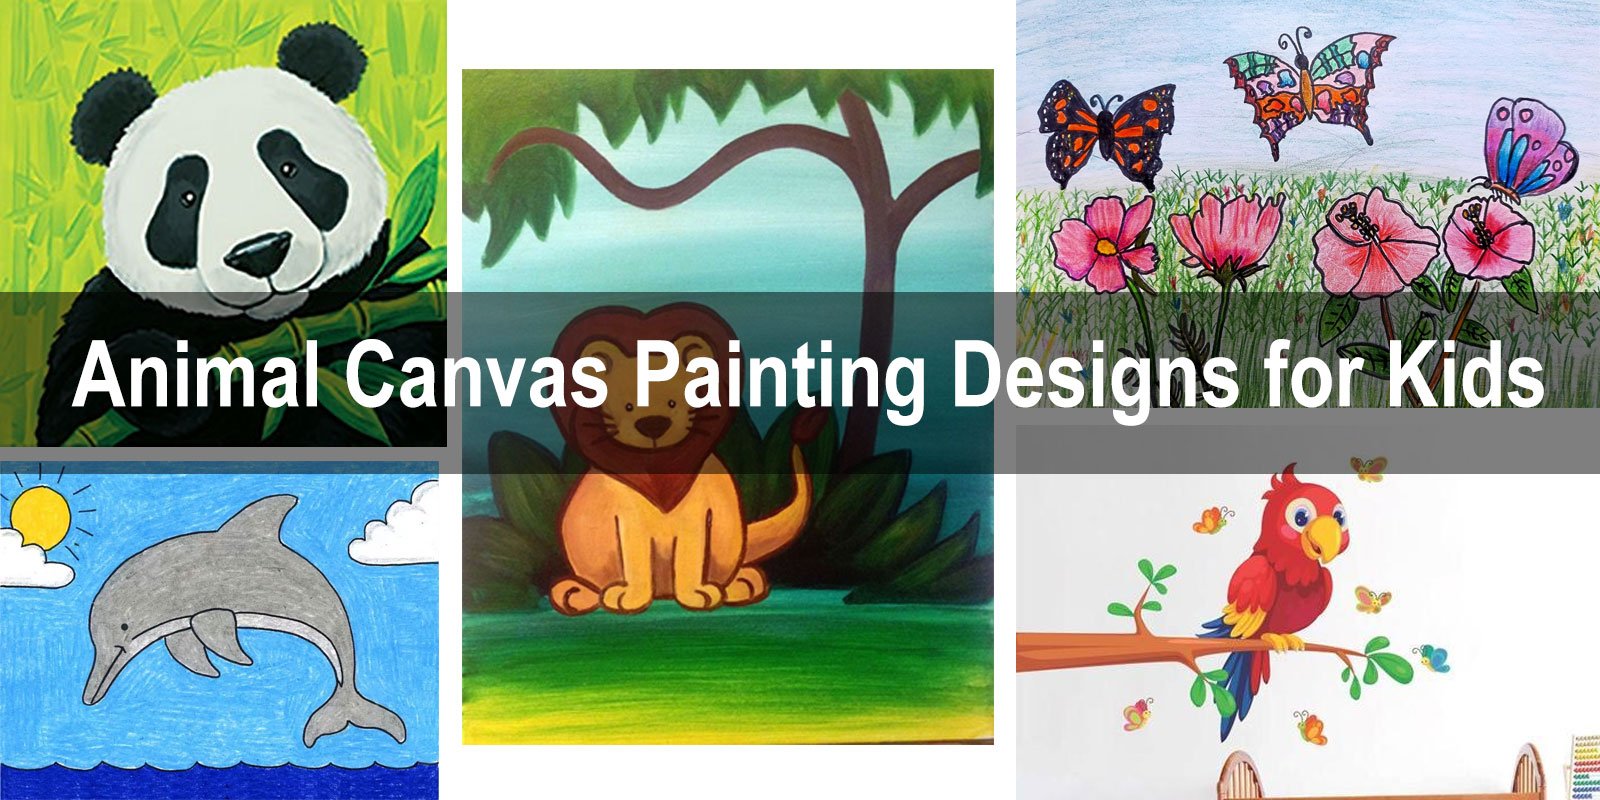 Animal Canvas Painting Designs for Kids